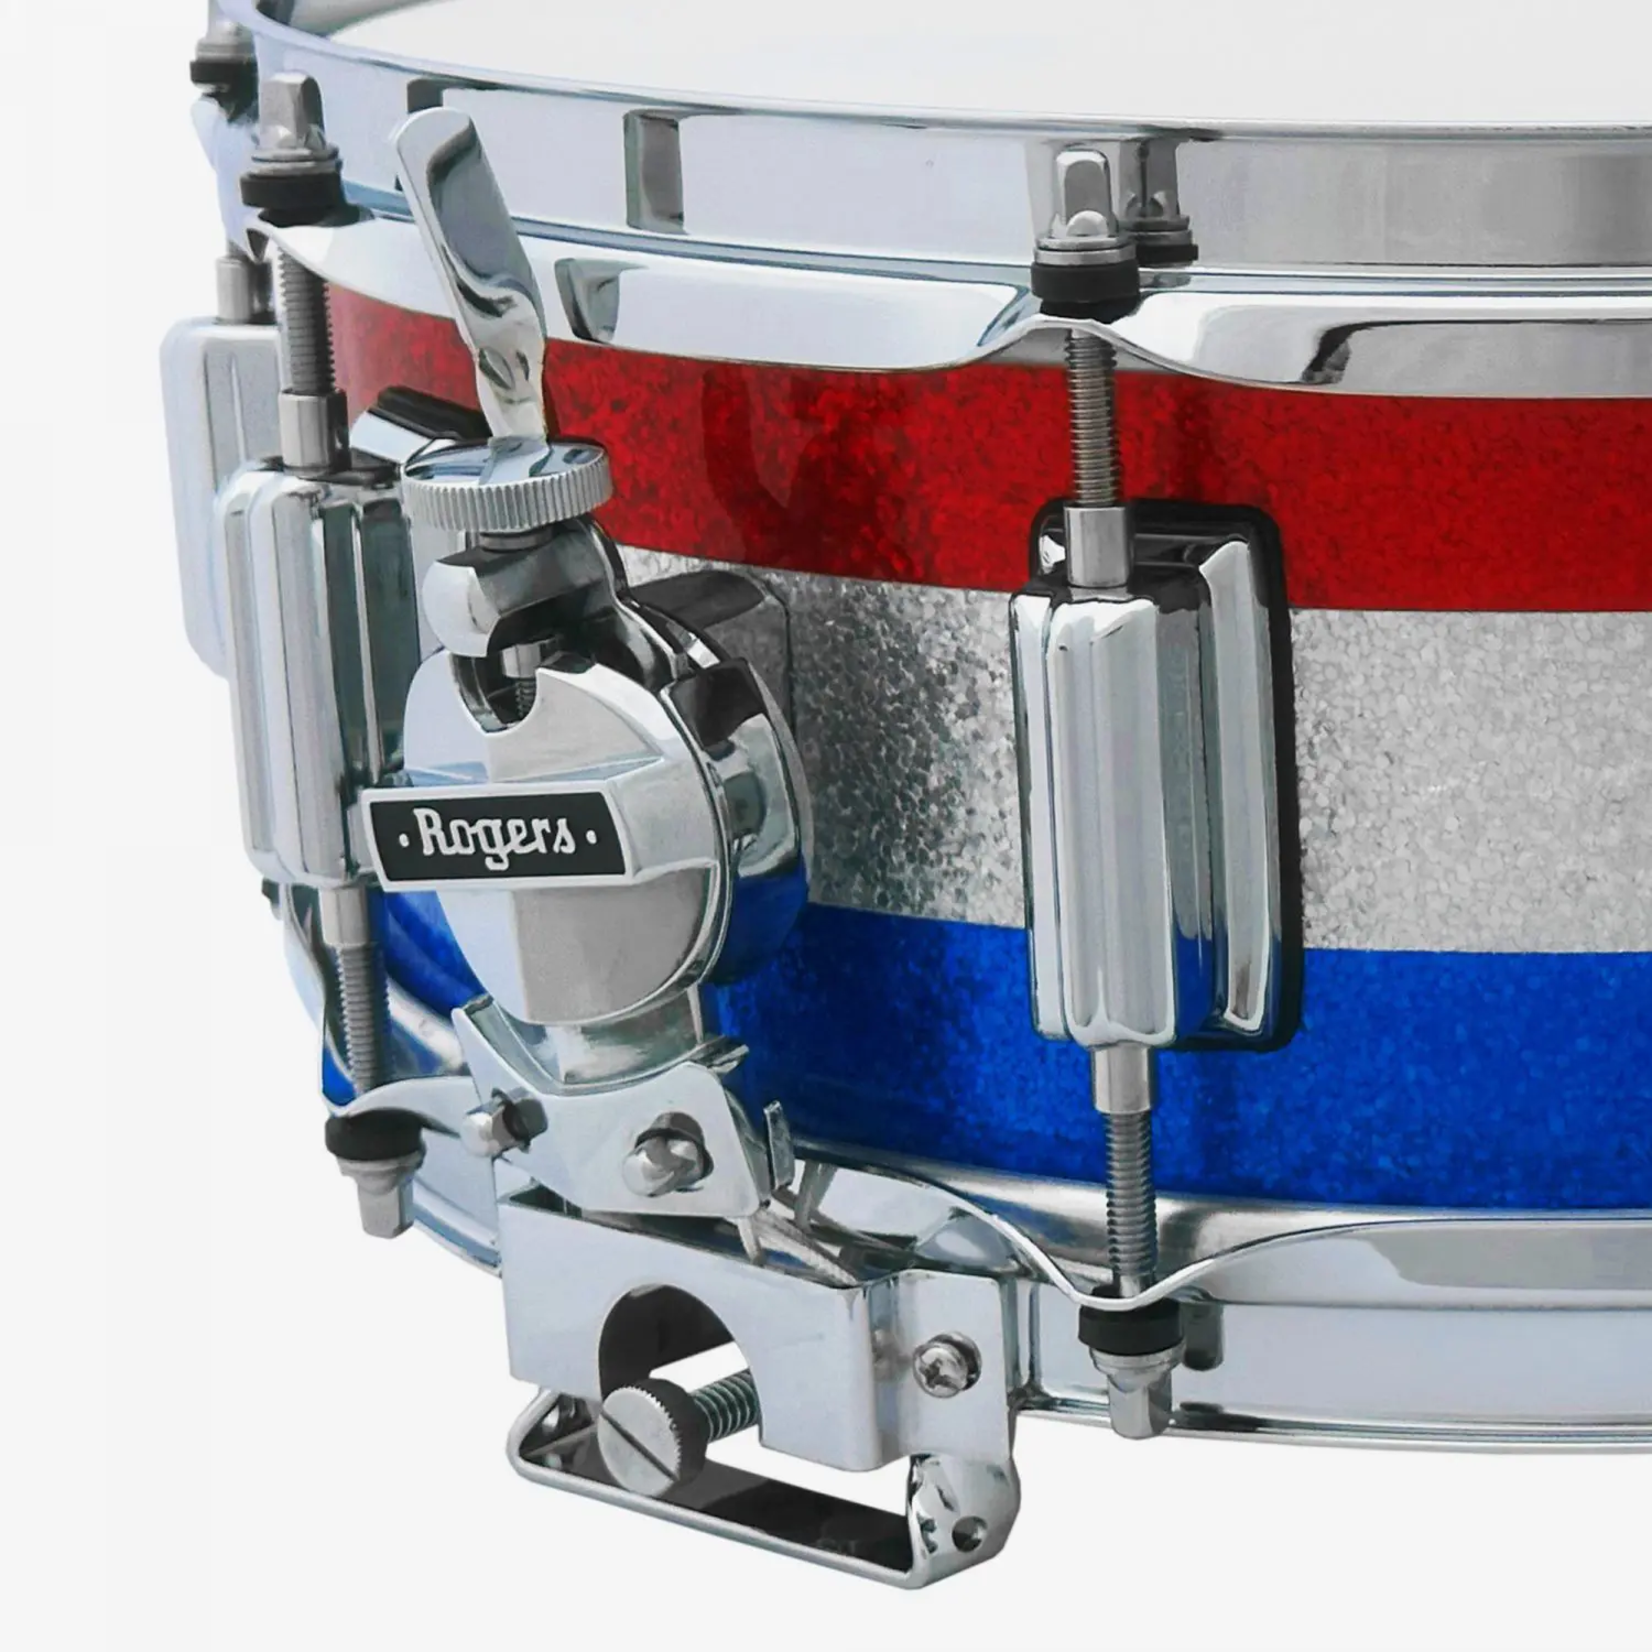 Rogers Rogers 5x14" Dyna-Sonic Snare Drum (Red, White, Blue Sparkle) 36RWB